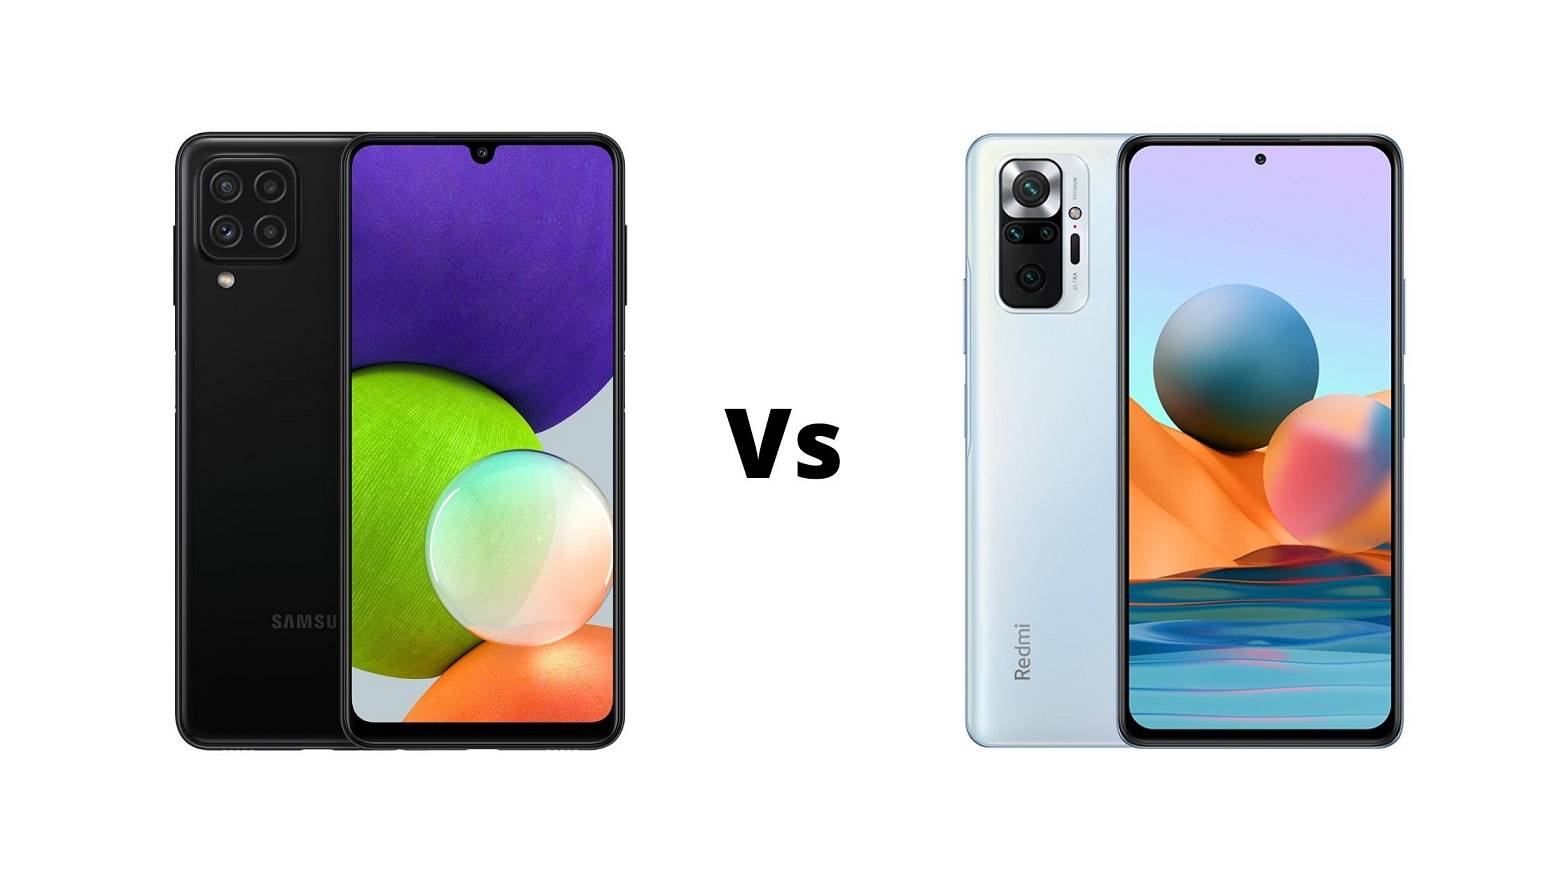 Samsung Galaxy A22 Vs Redmi Note 10 Pro Which one should you buy